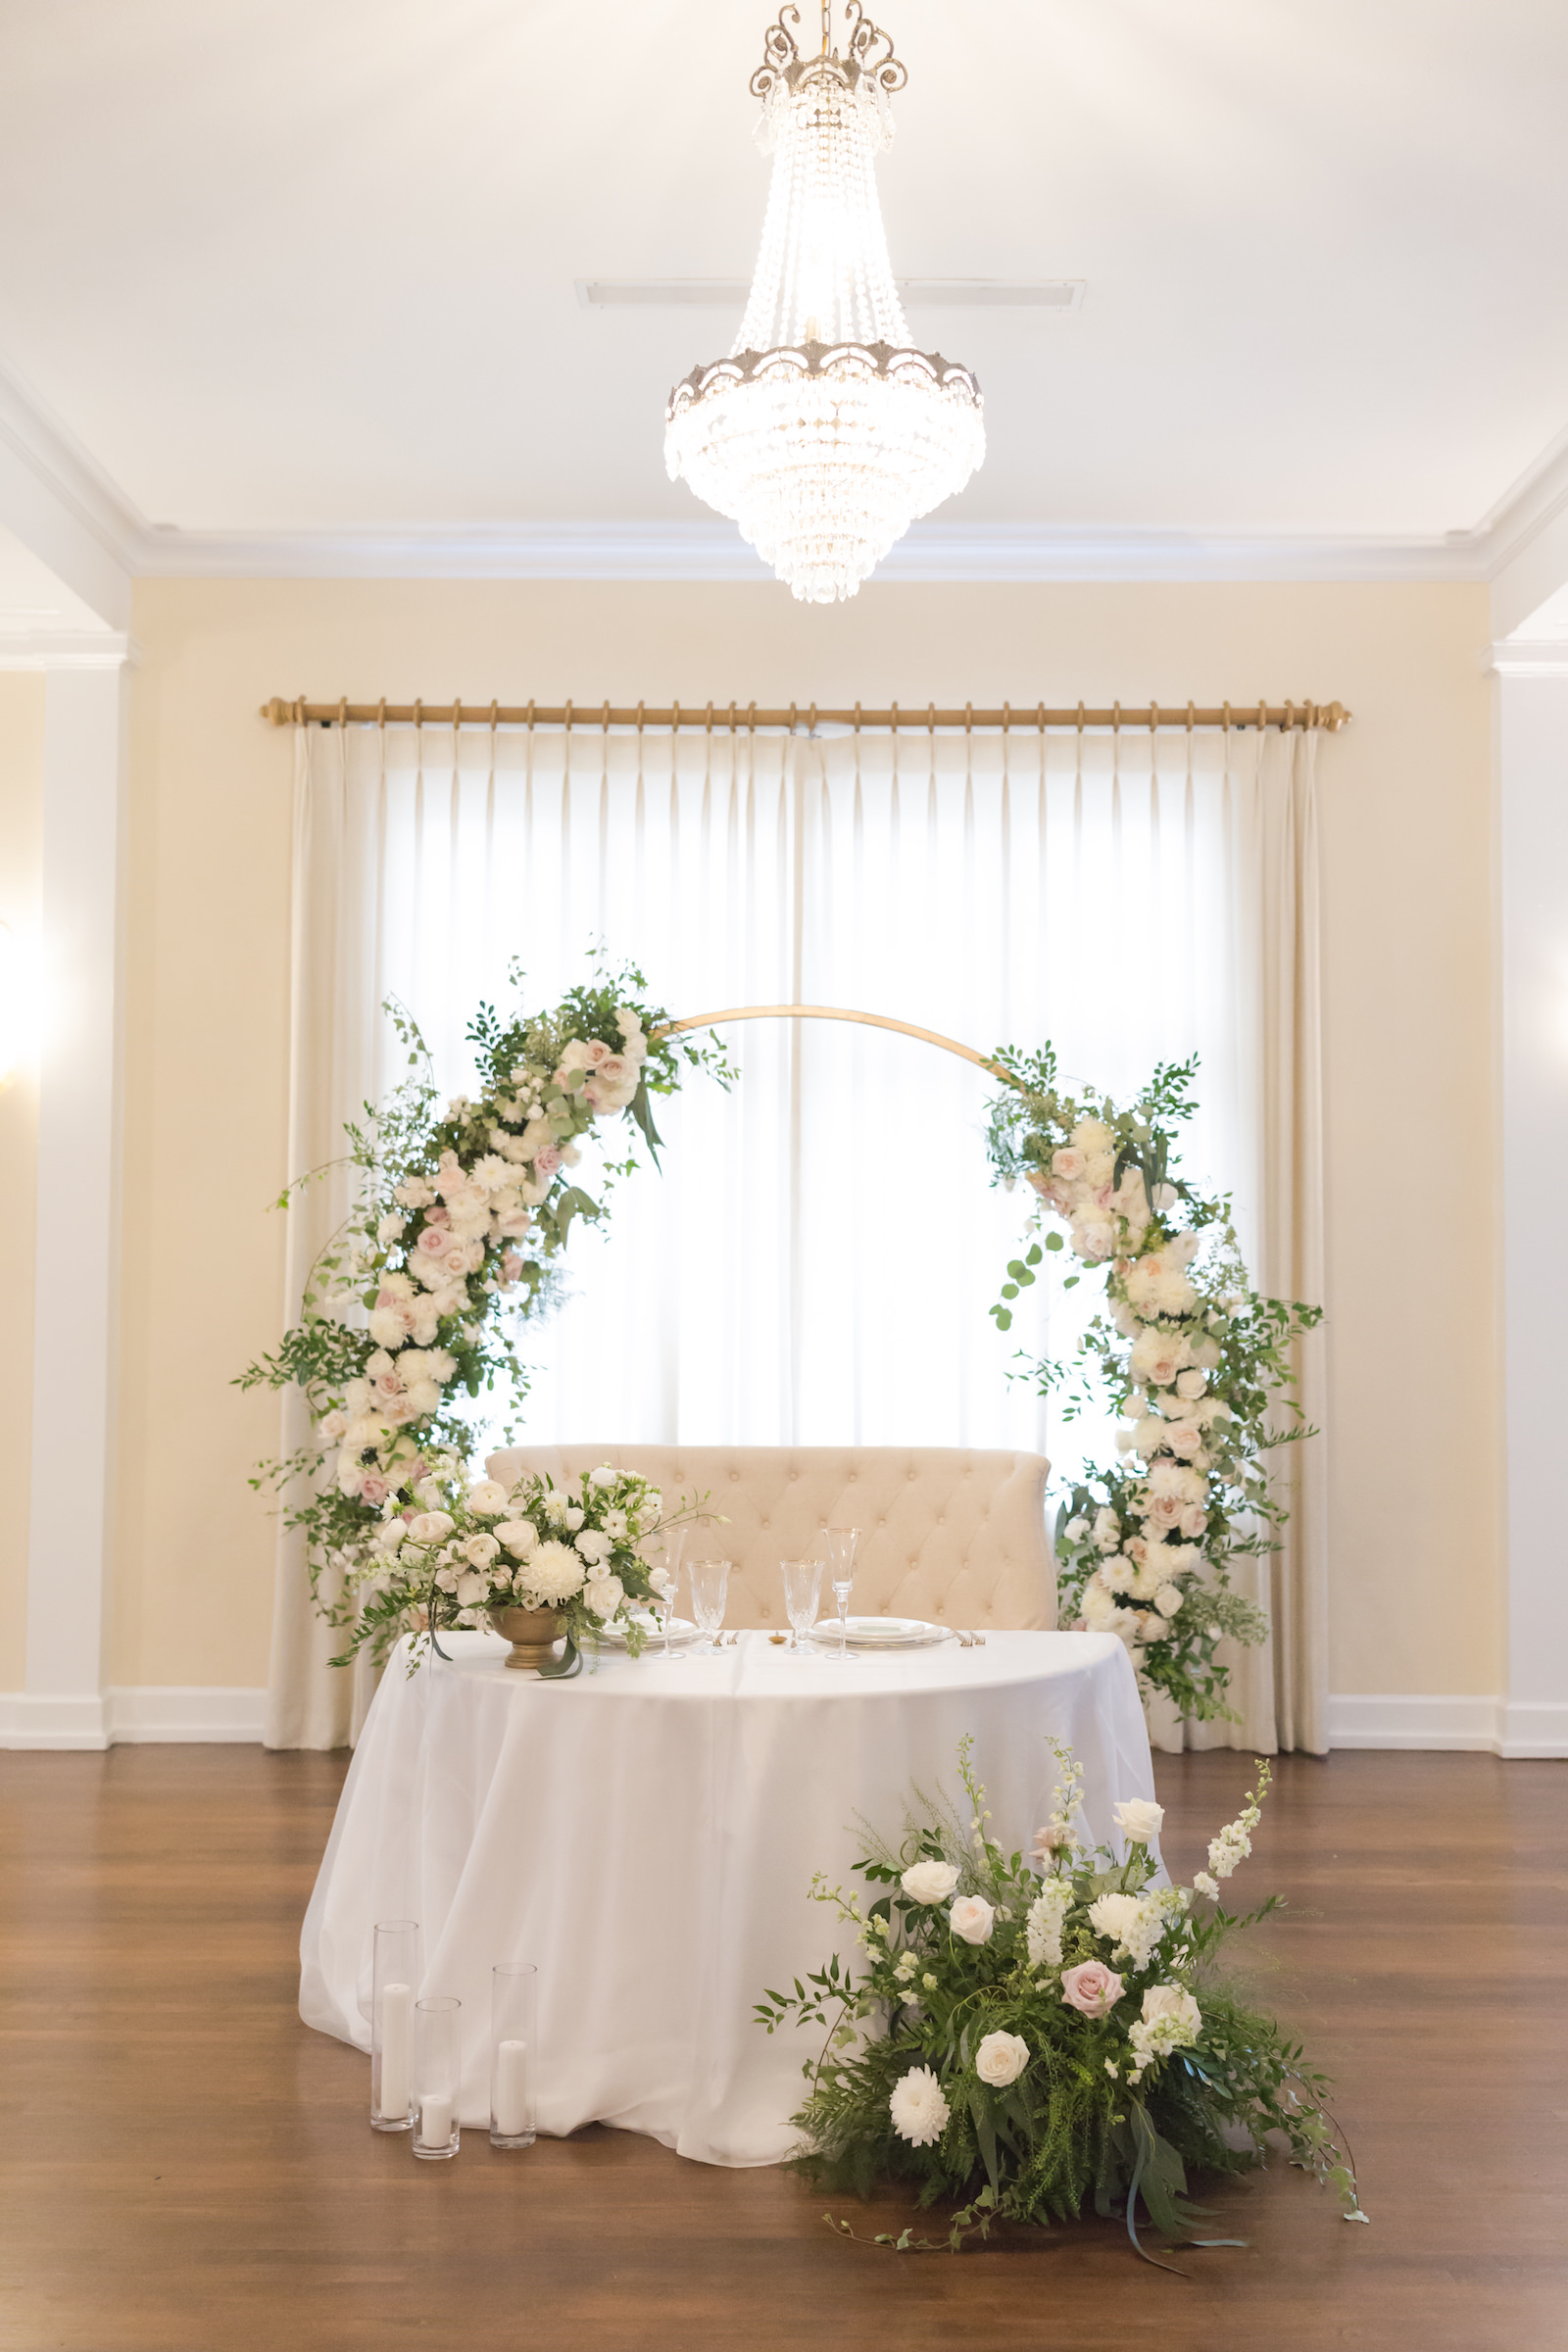 Southern Charm classic and timeless wedding reception decor, circular arch with lush white and blush pink florals, eucalyptus and greenery arrangements, sweetheart table with white linens, ivory loveseat | Tampa Bay wedding planner Elegant Affairs by Design | Kate Ryan Event Rentals